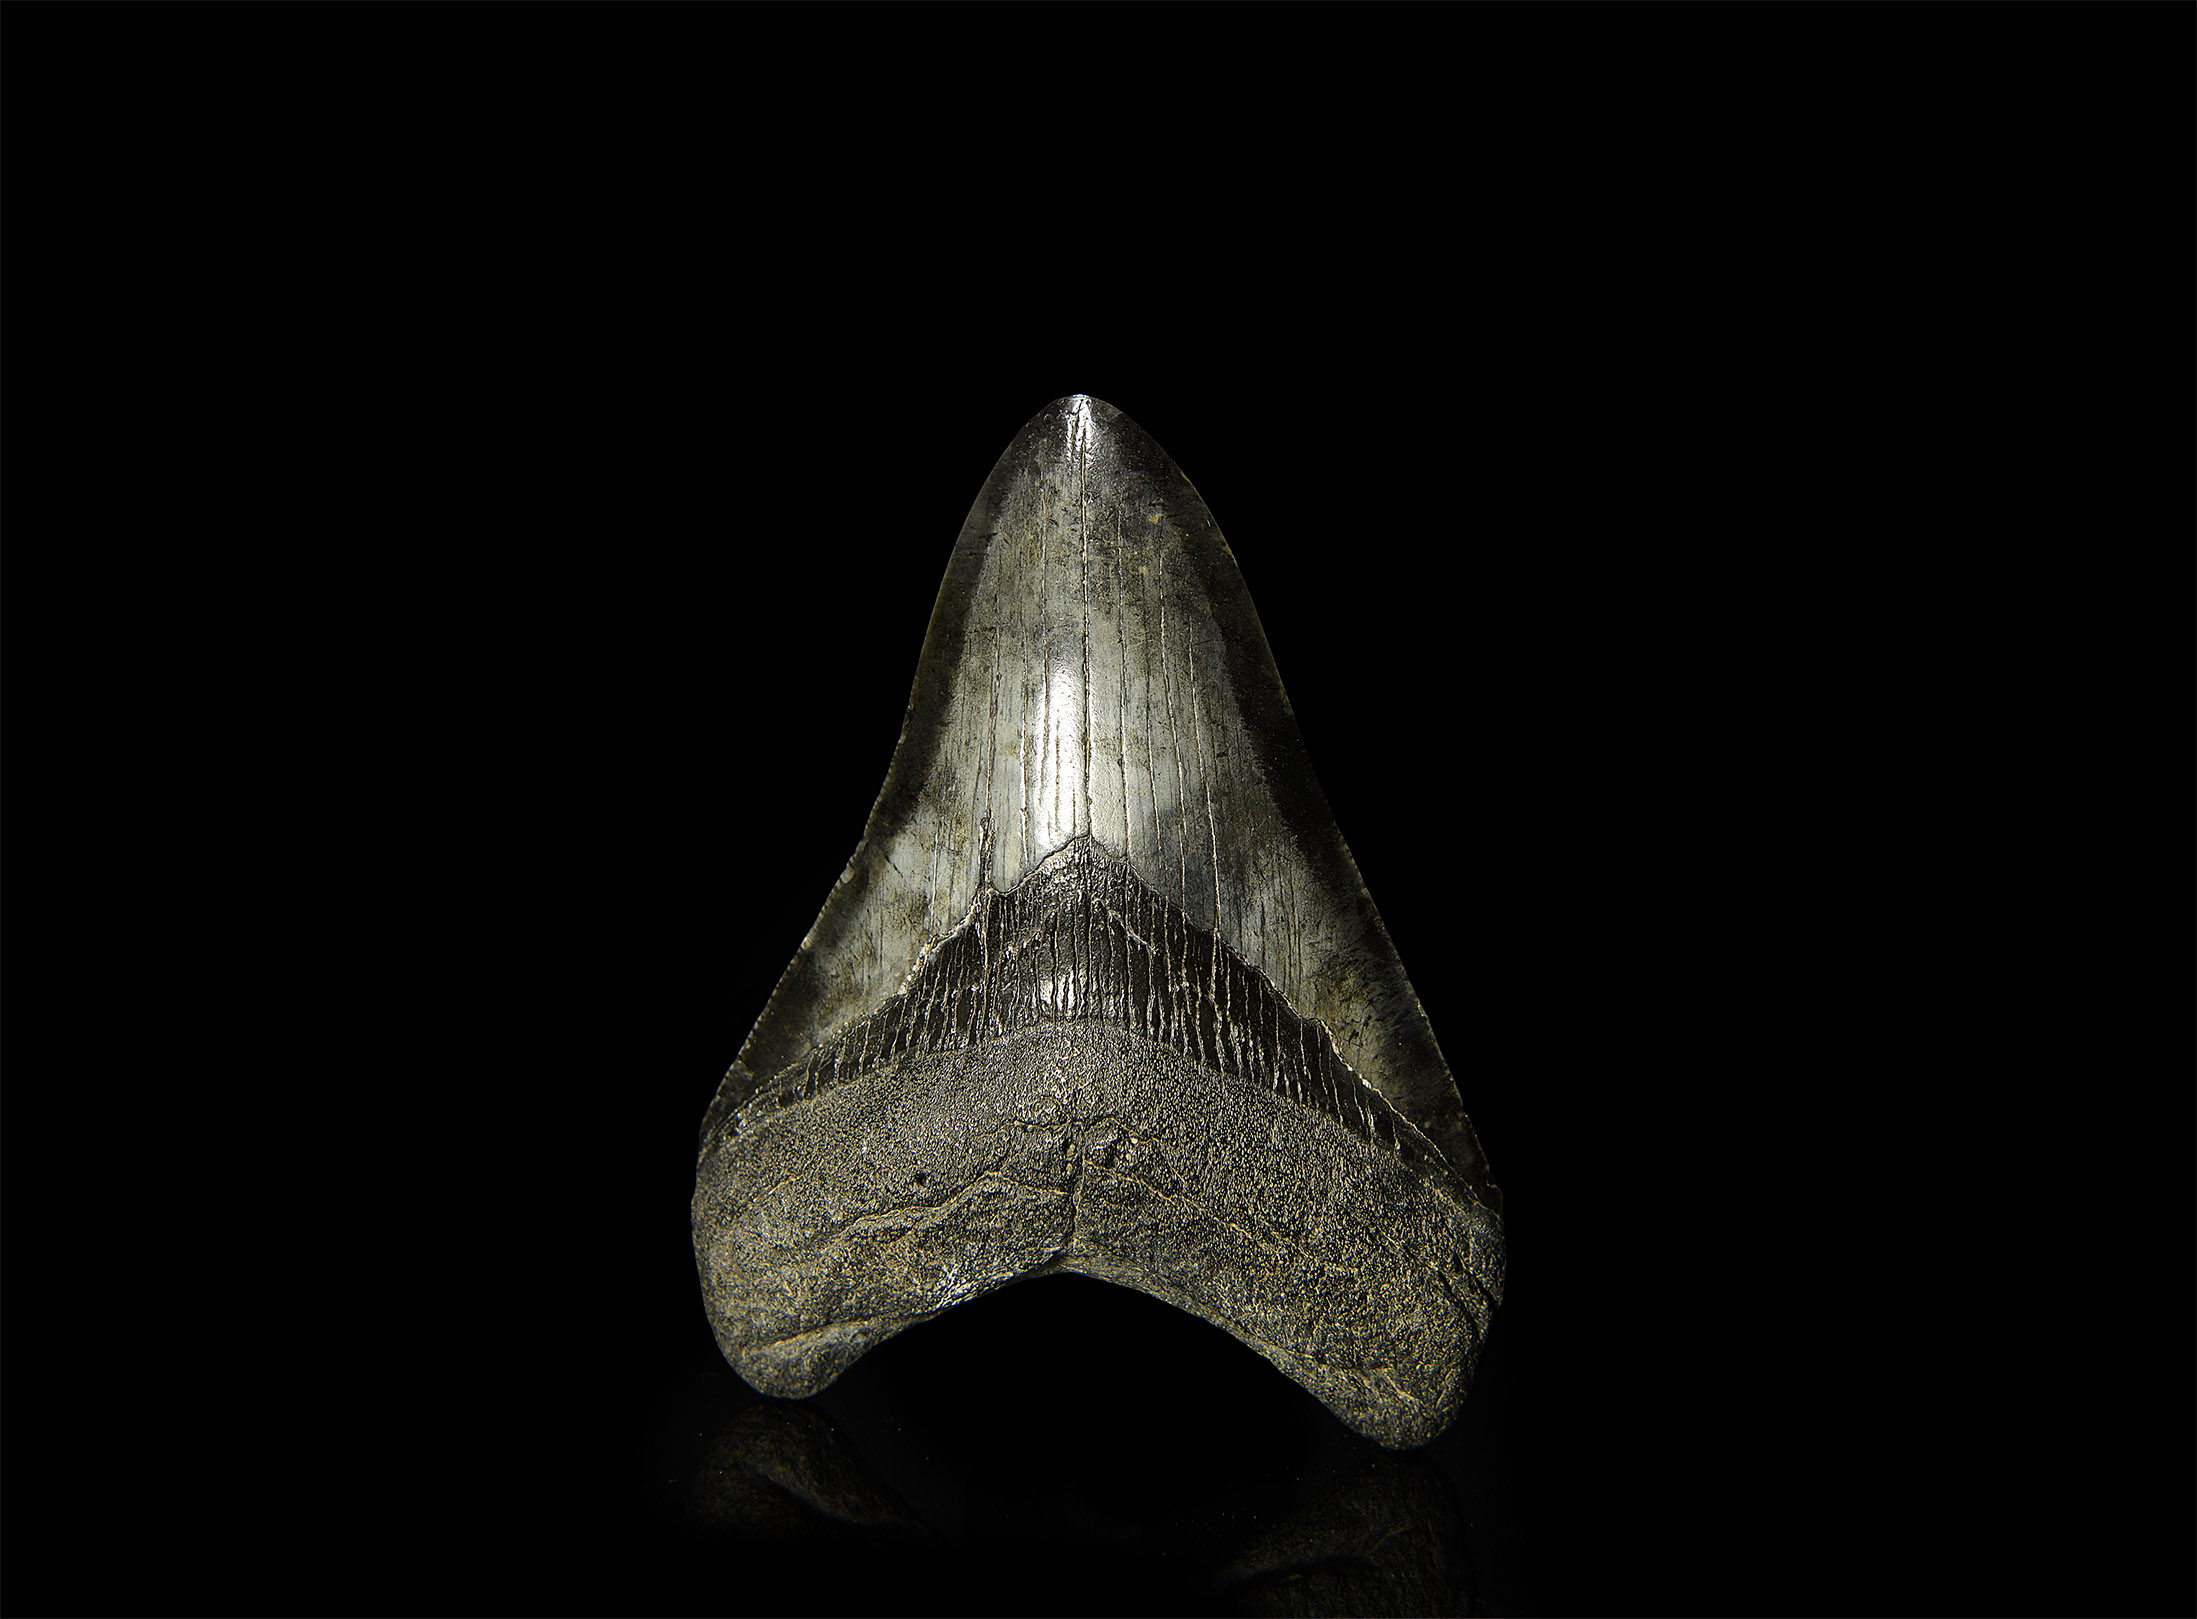 Natural History - Fossil Megalodon Giant Shark Tooth